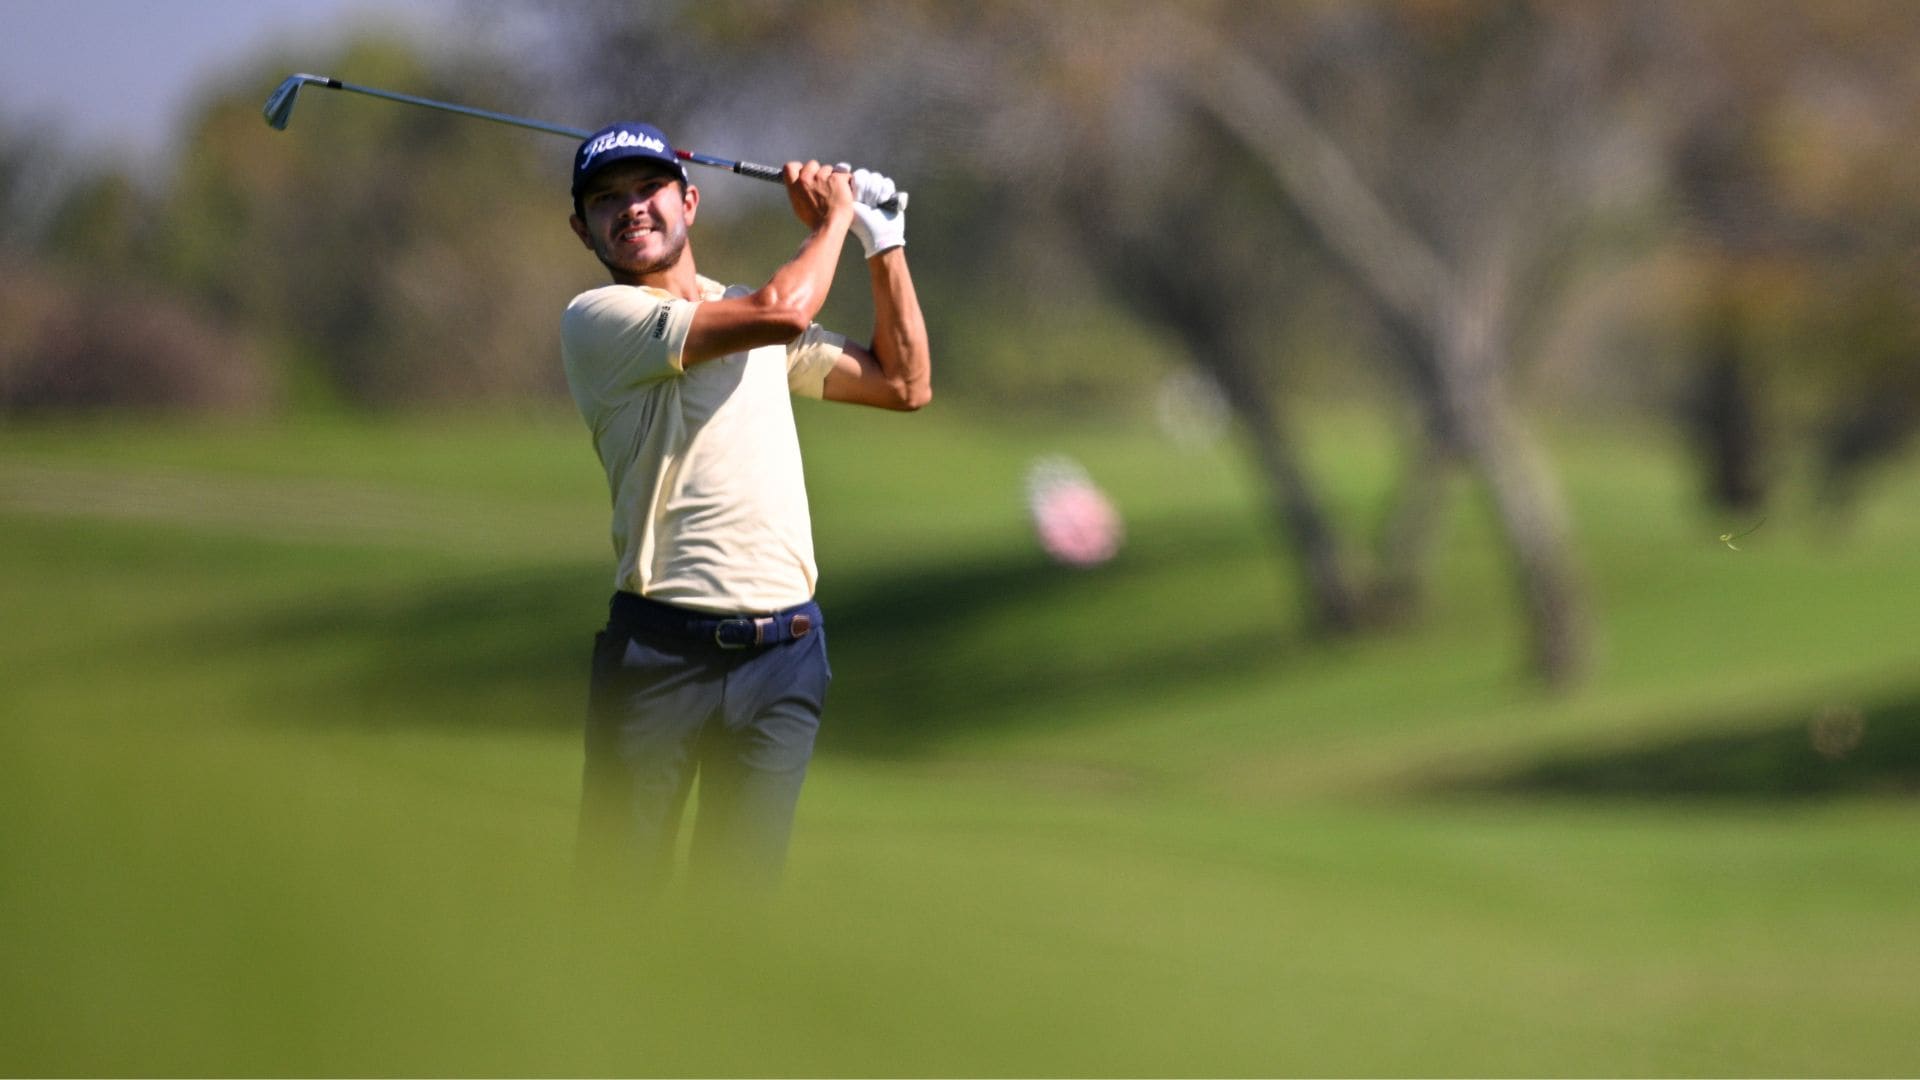 After nearly quitting golf, world No. 810 Raul Pereda fires 65, is T-2 at Mexican Open